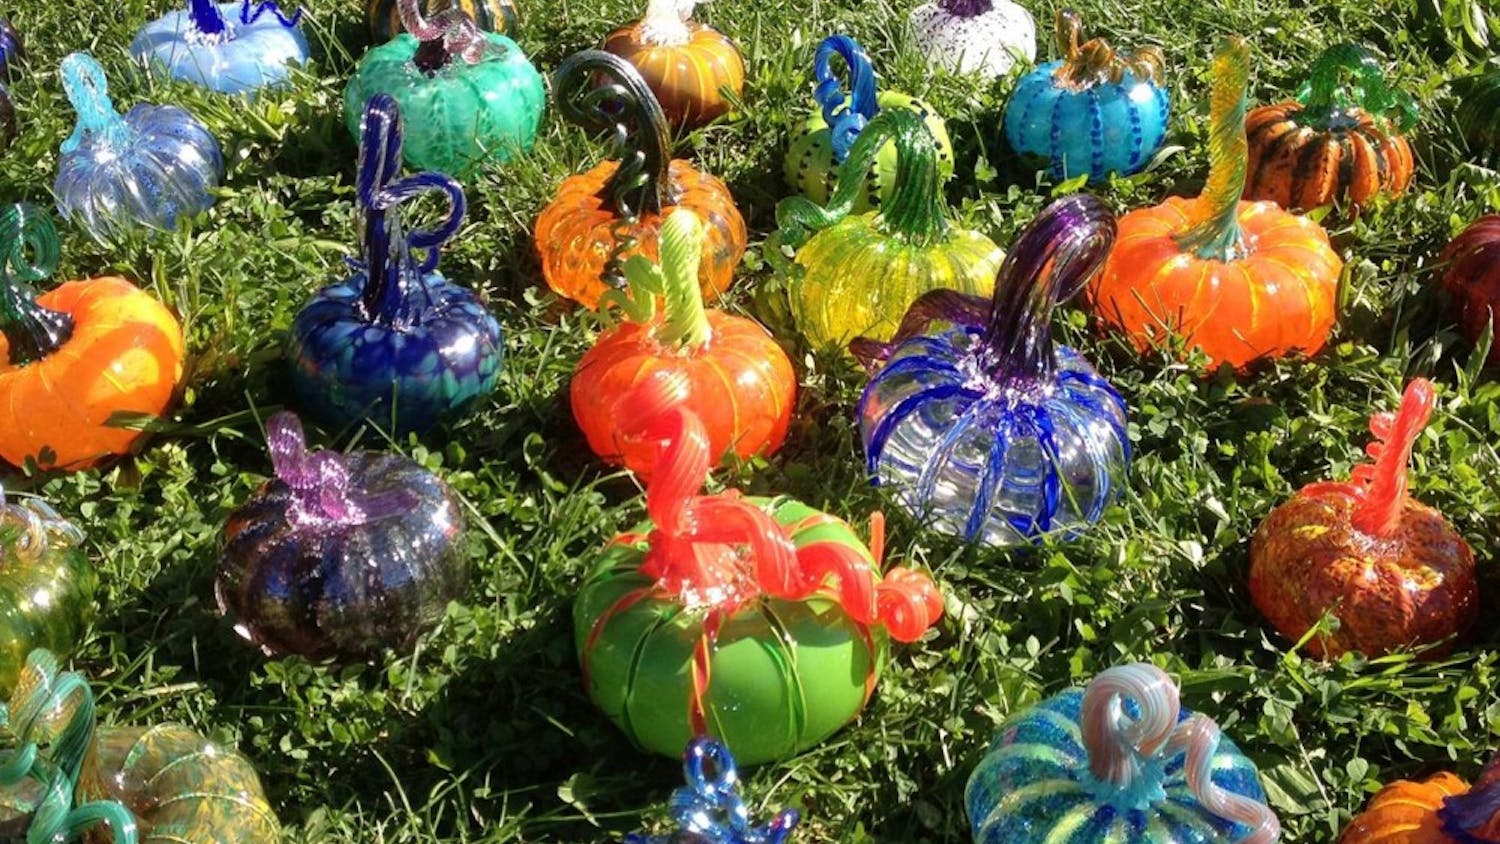 Bloomington Creative Glass Center will have a grand opening event Oct. 6 with glass pumpkins available for purchase.